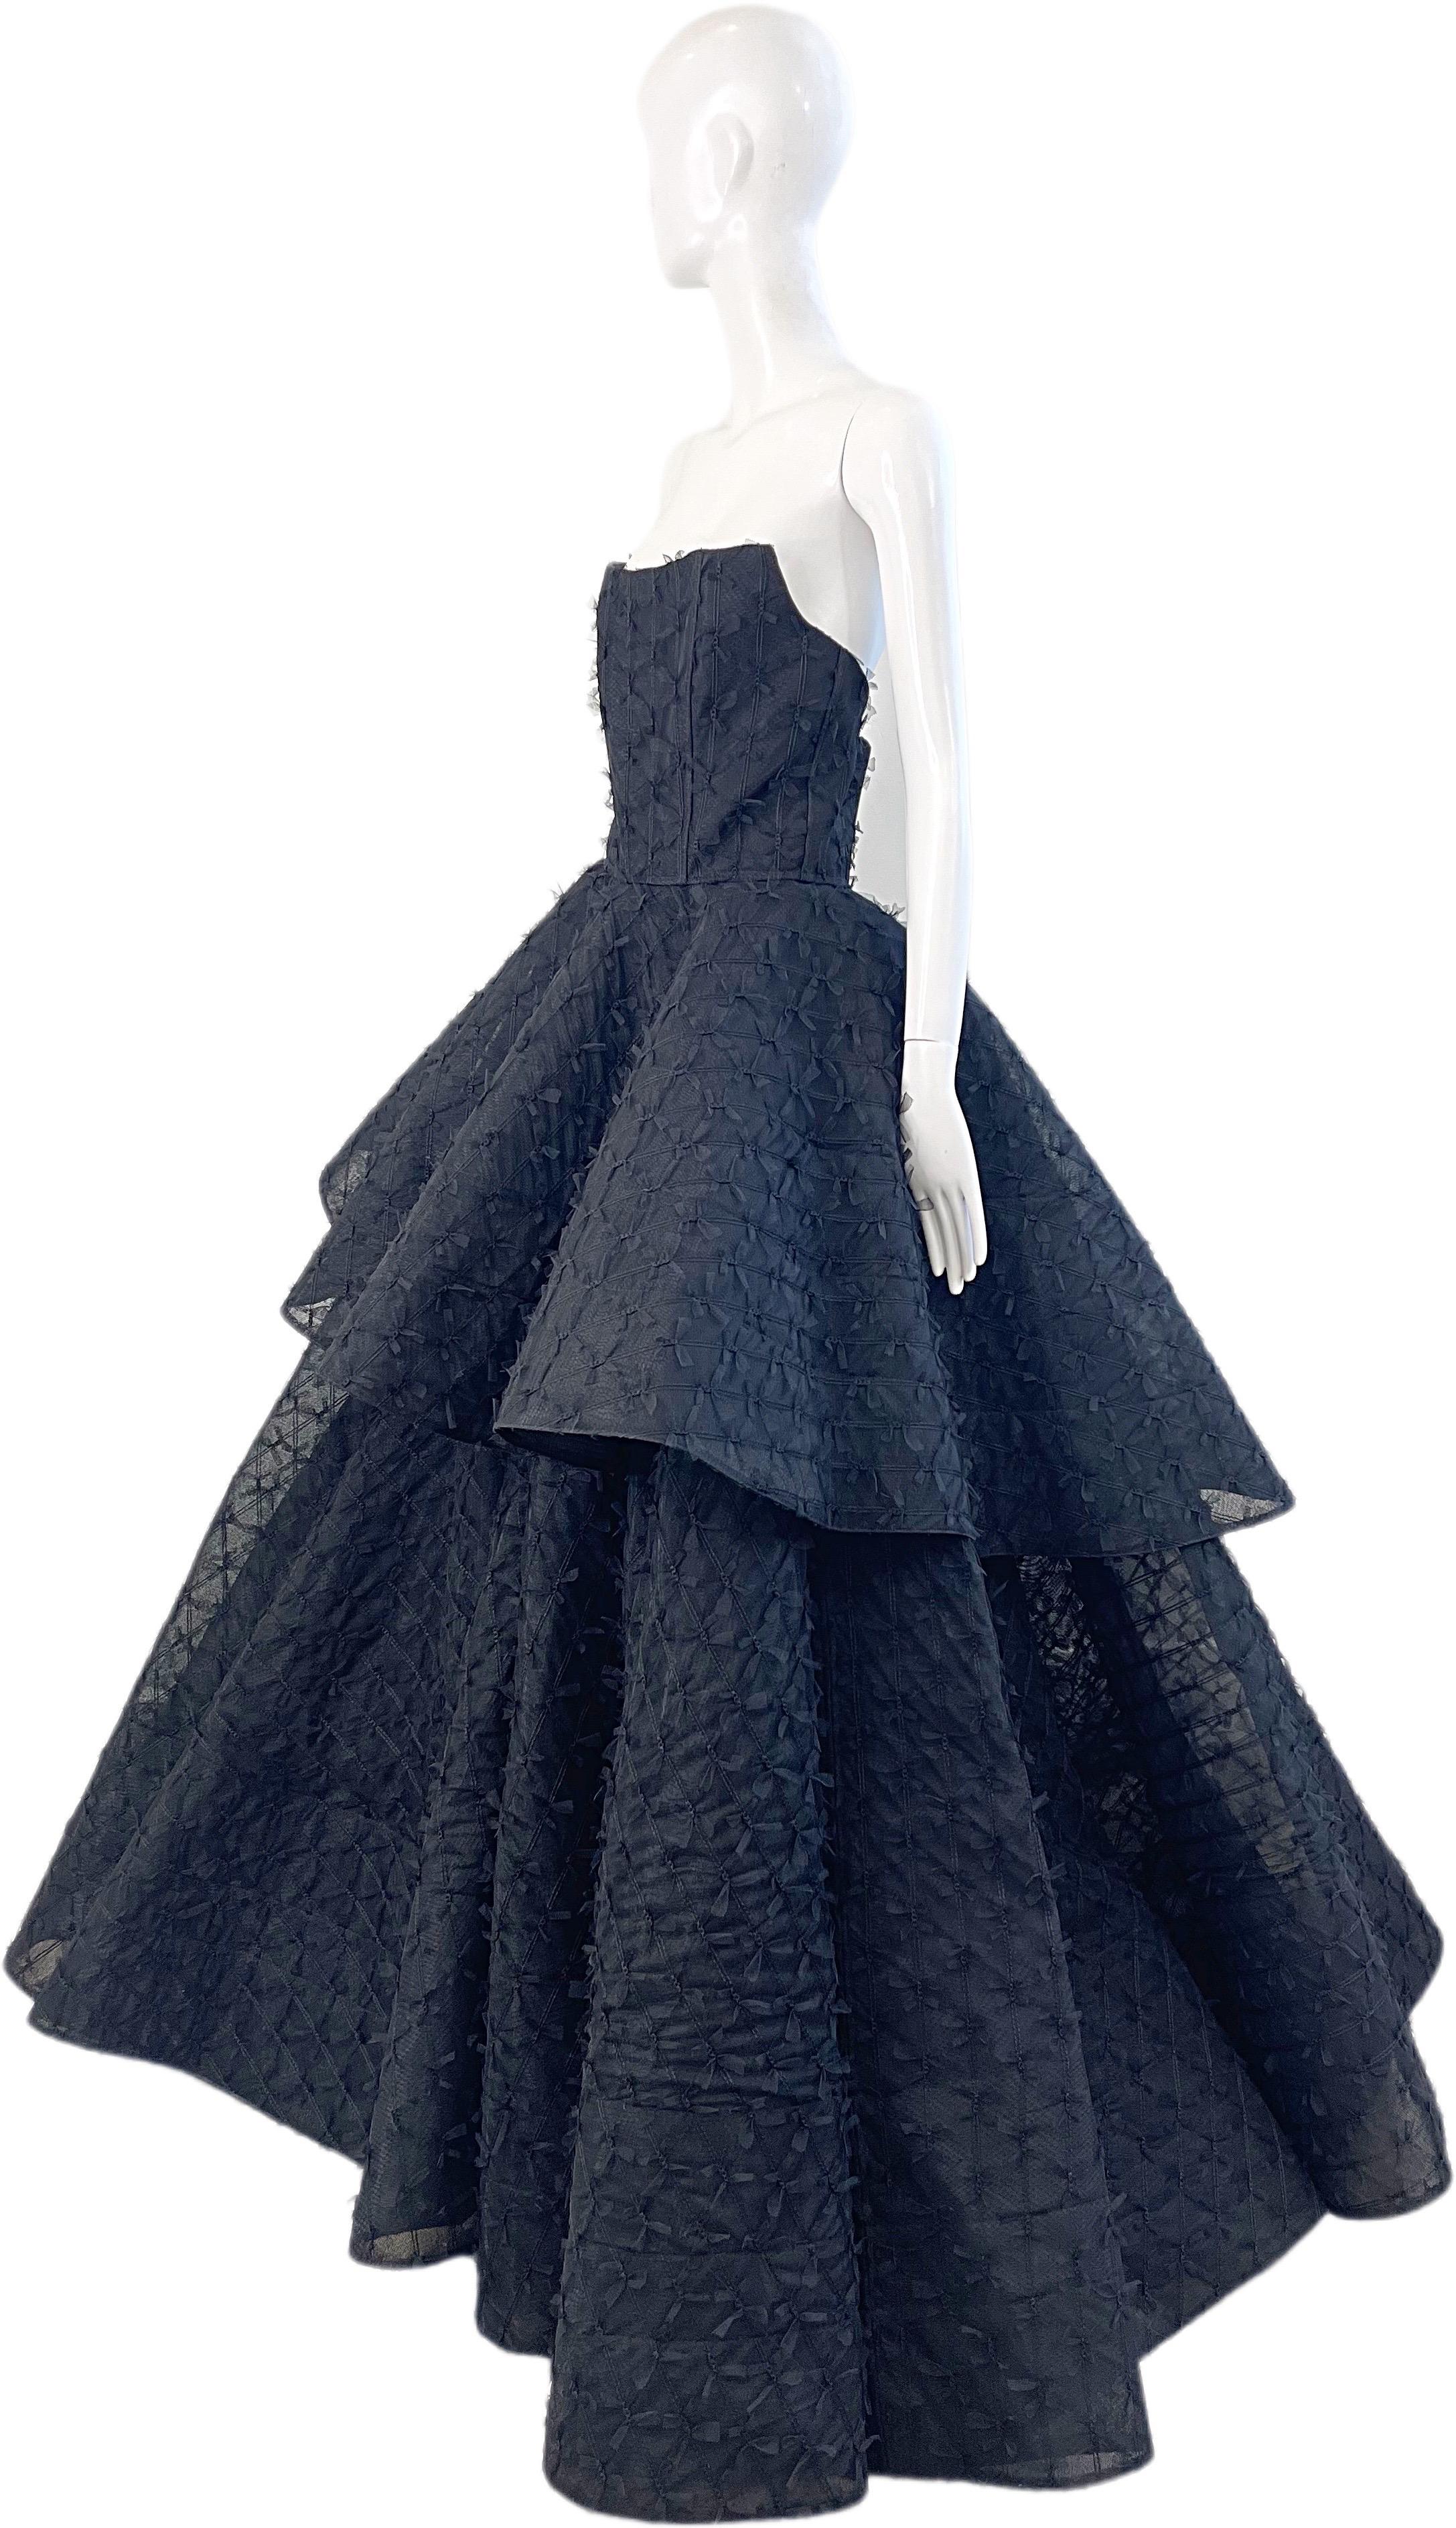 Christian Siriano Couture Spring 2019 Runway Size 4 / 6 Black Horsehair Gown For Sale 4